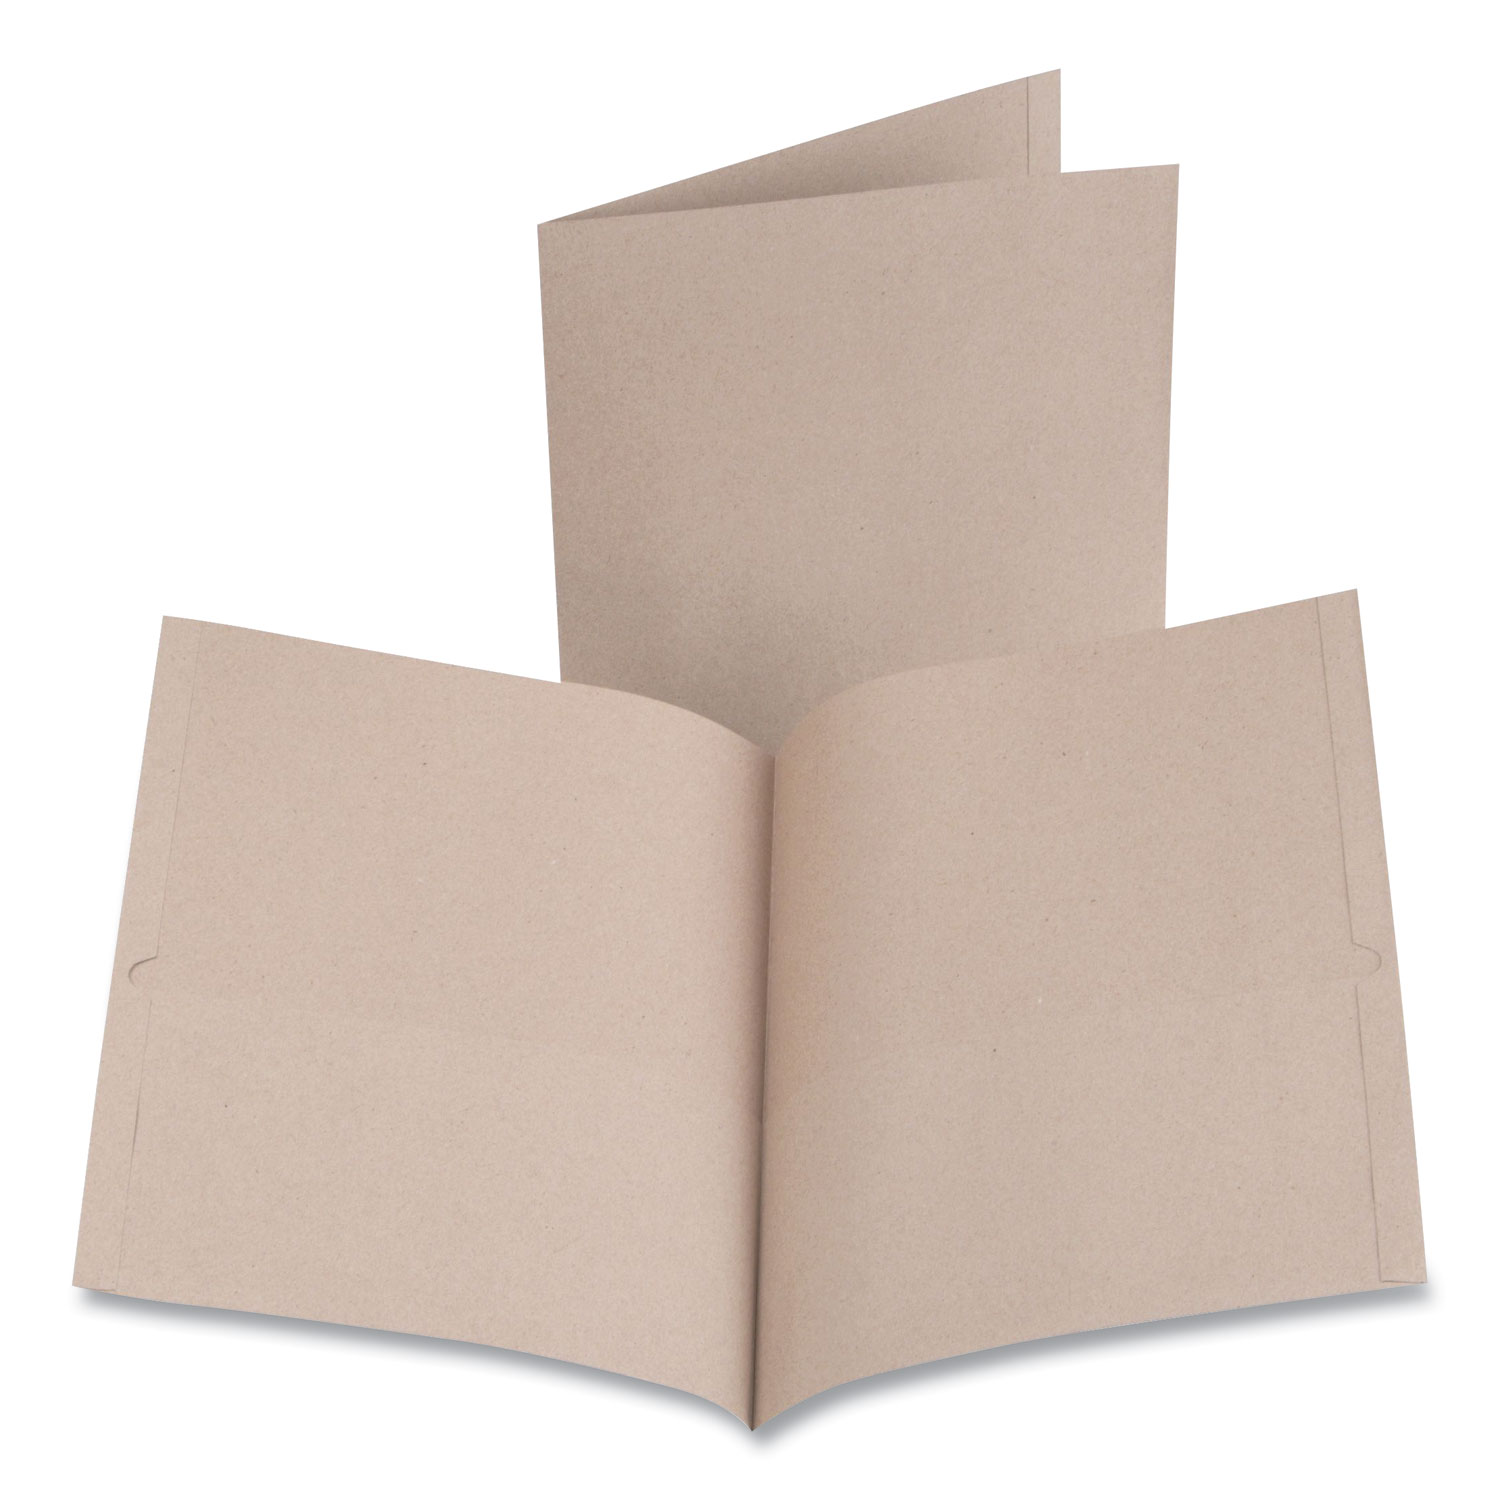  Oxford 00574 Earthwise by Oxford 100% Recycled Paper Twin-Pocket Portfolio, 100 Sheet Capacity, Letter, Natural, 10/Pack (OXF482504) 